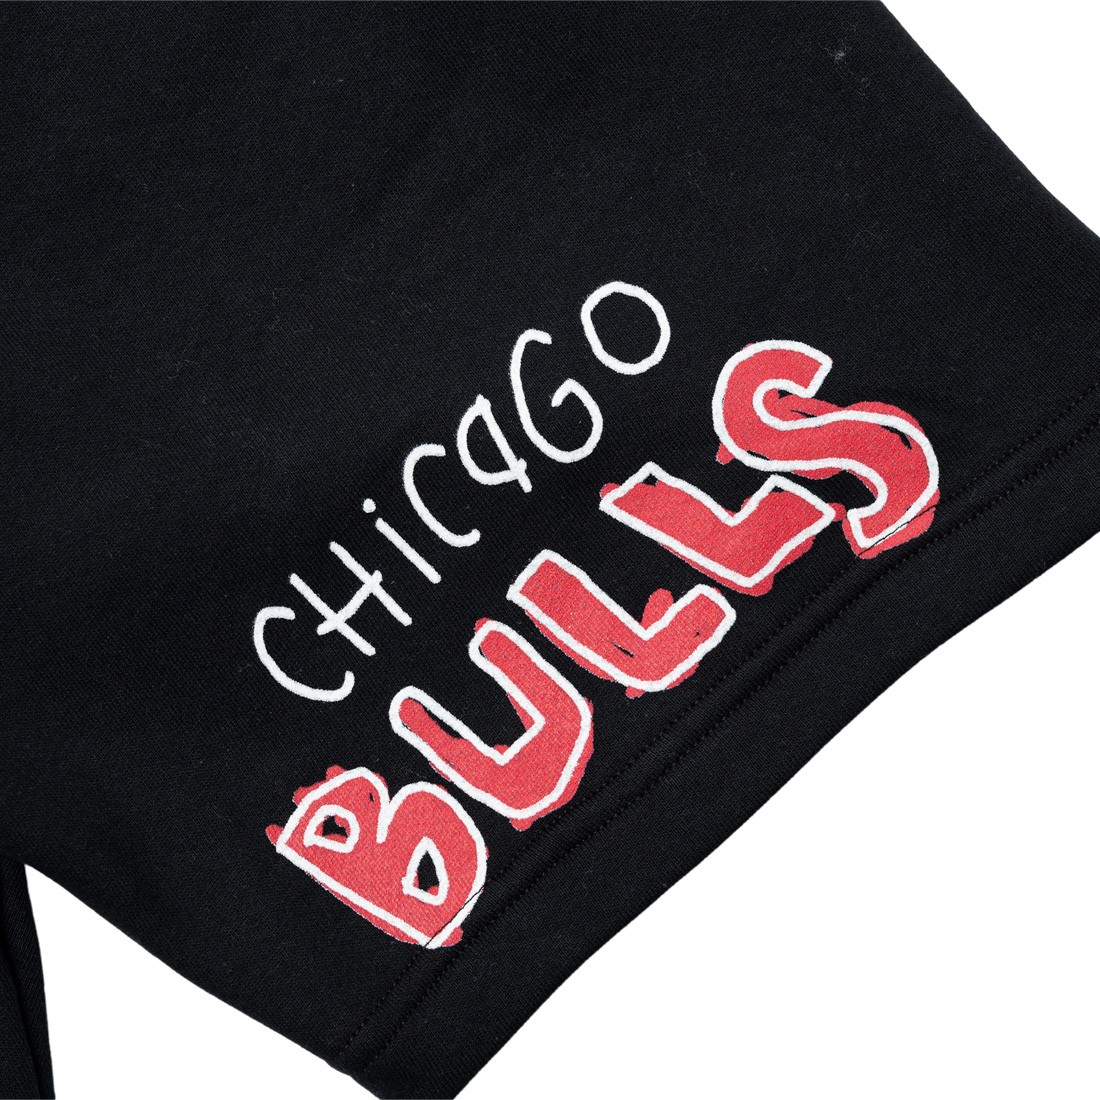 After School Special Black Chicago Bulls Shorts